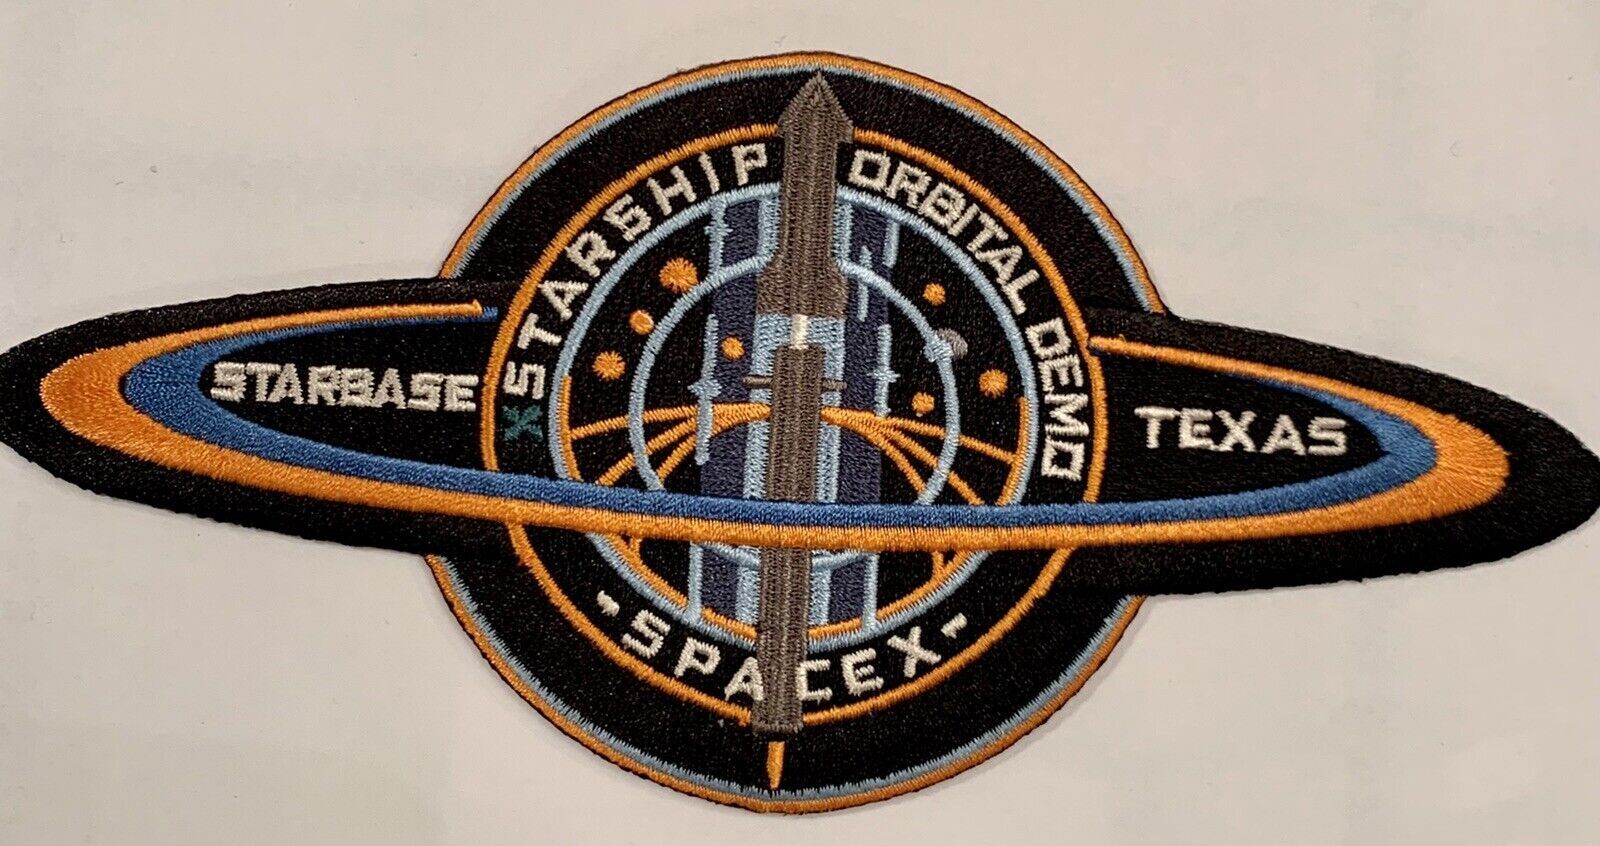 Original SpaceX Starship Orbital Demo Launch Mission Patch 3”